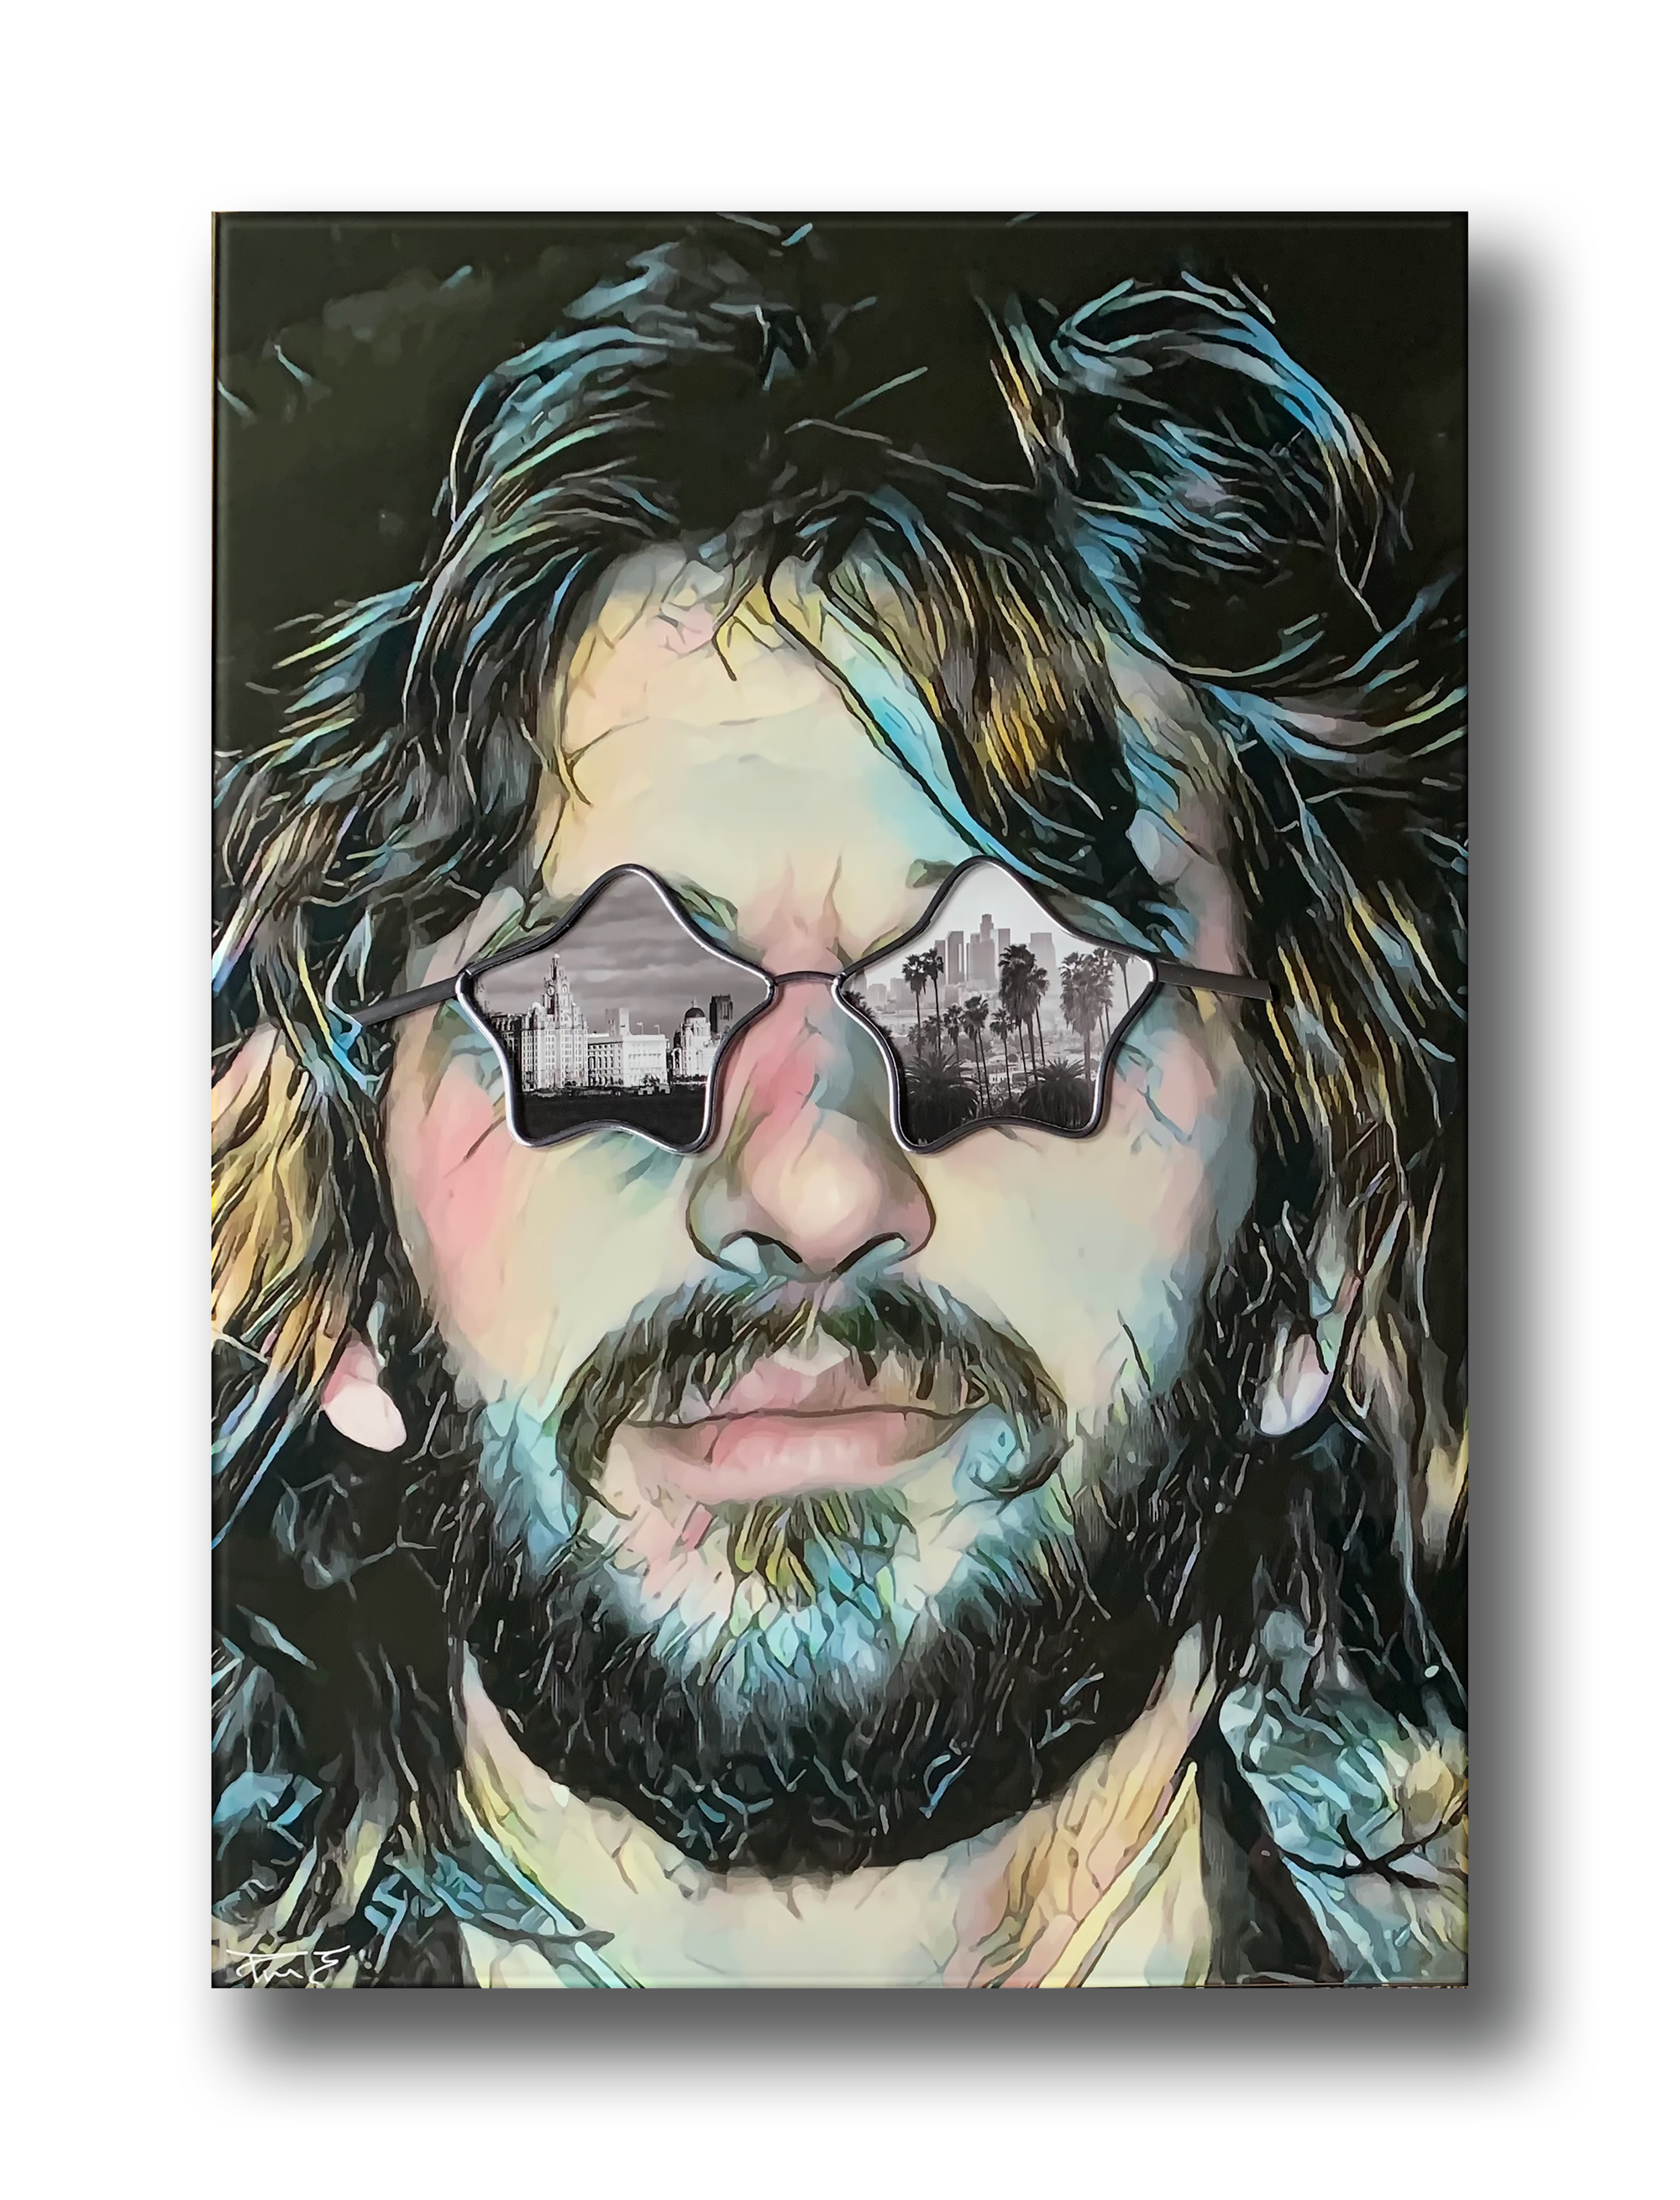 Paul Marshall Johnson, Print on Toughened Safety Glass with original lead work, Ringo Starr